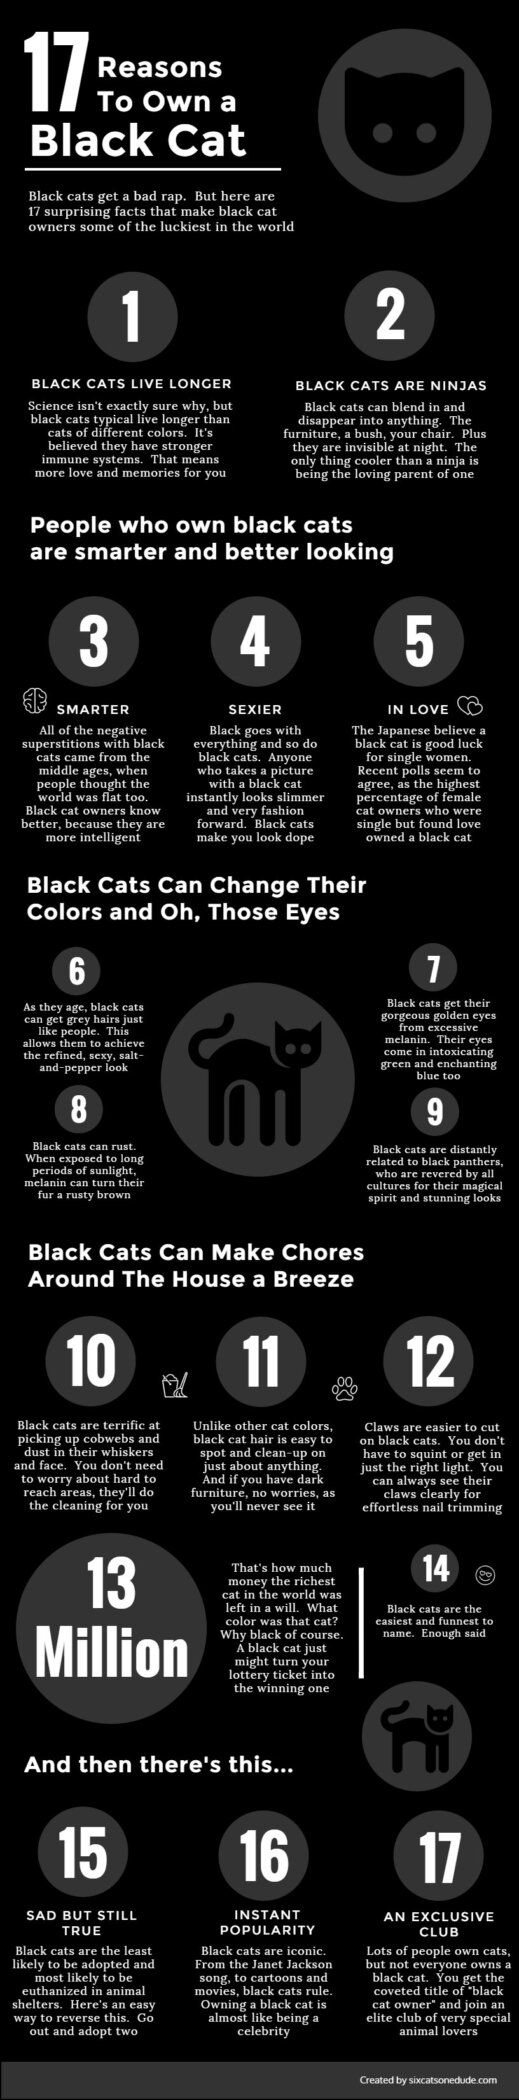 Infographic: 17 Reasons to “own” a Black Cat